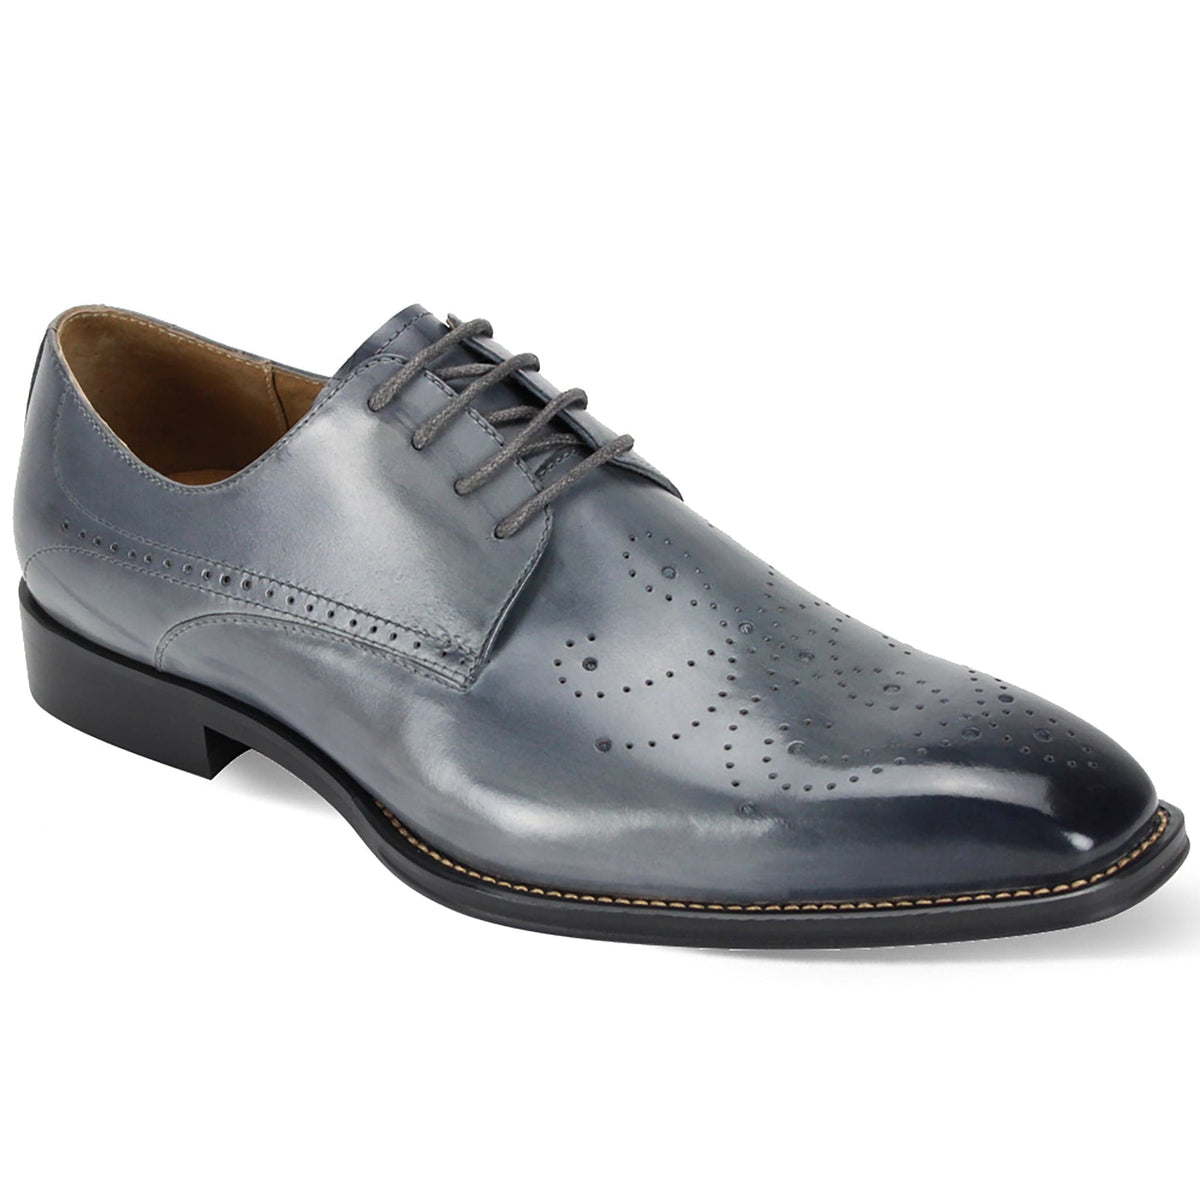 GIOVANNI LEATHER SHOES FT GREY / 7 GIOVANNI LEATHER SHOES-JOEL